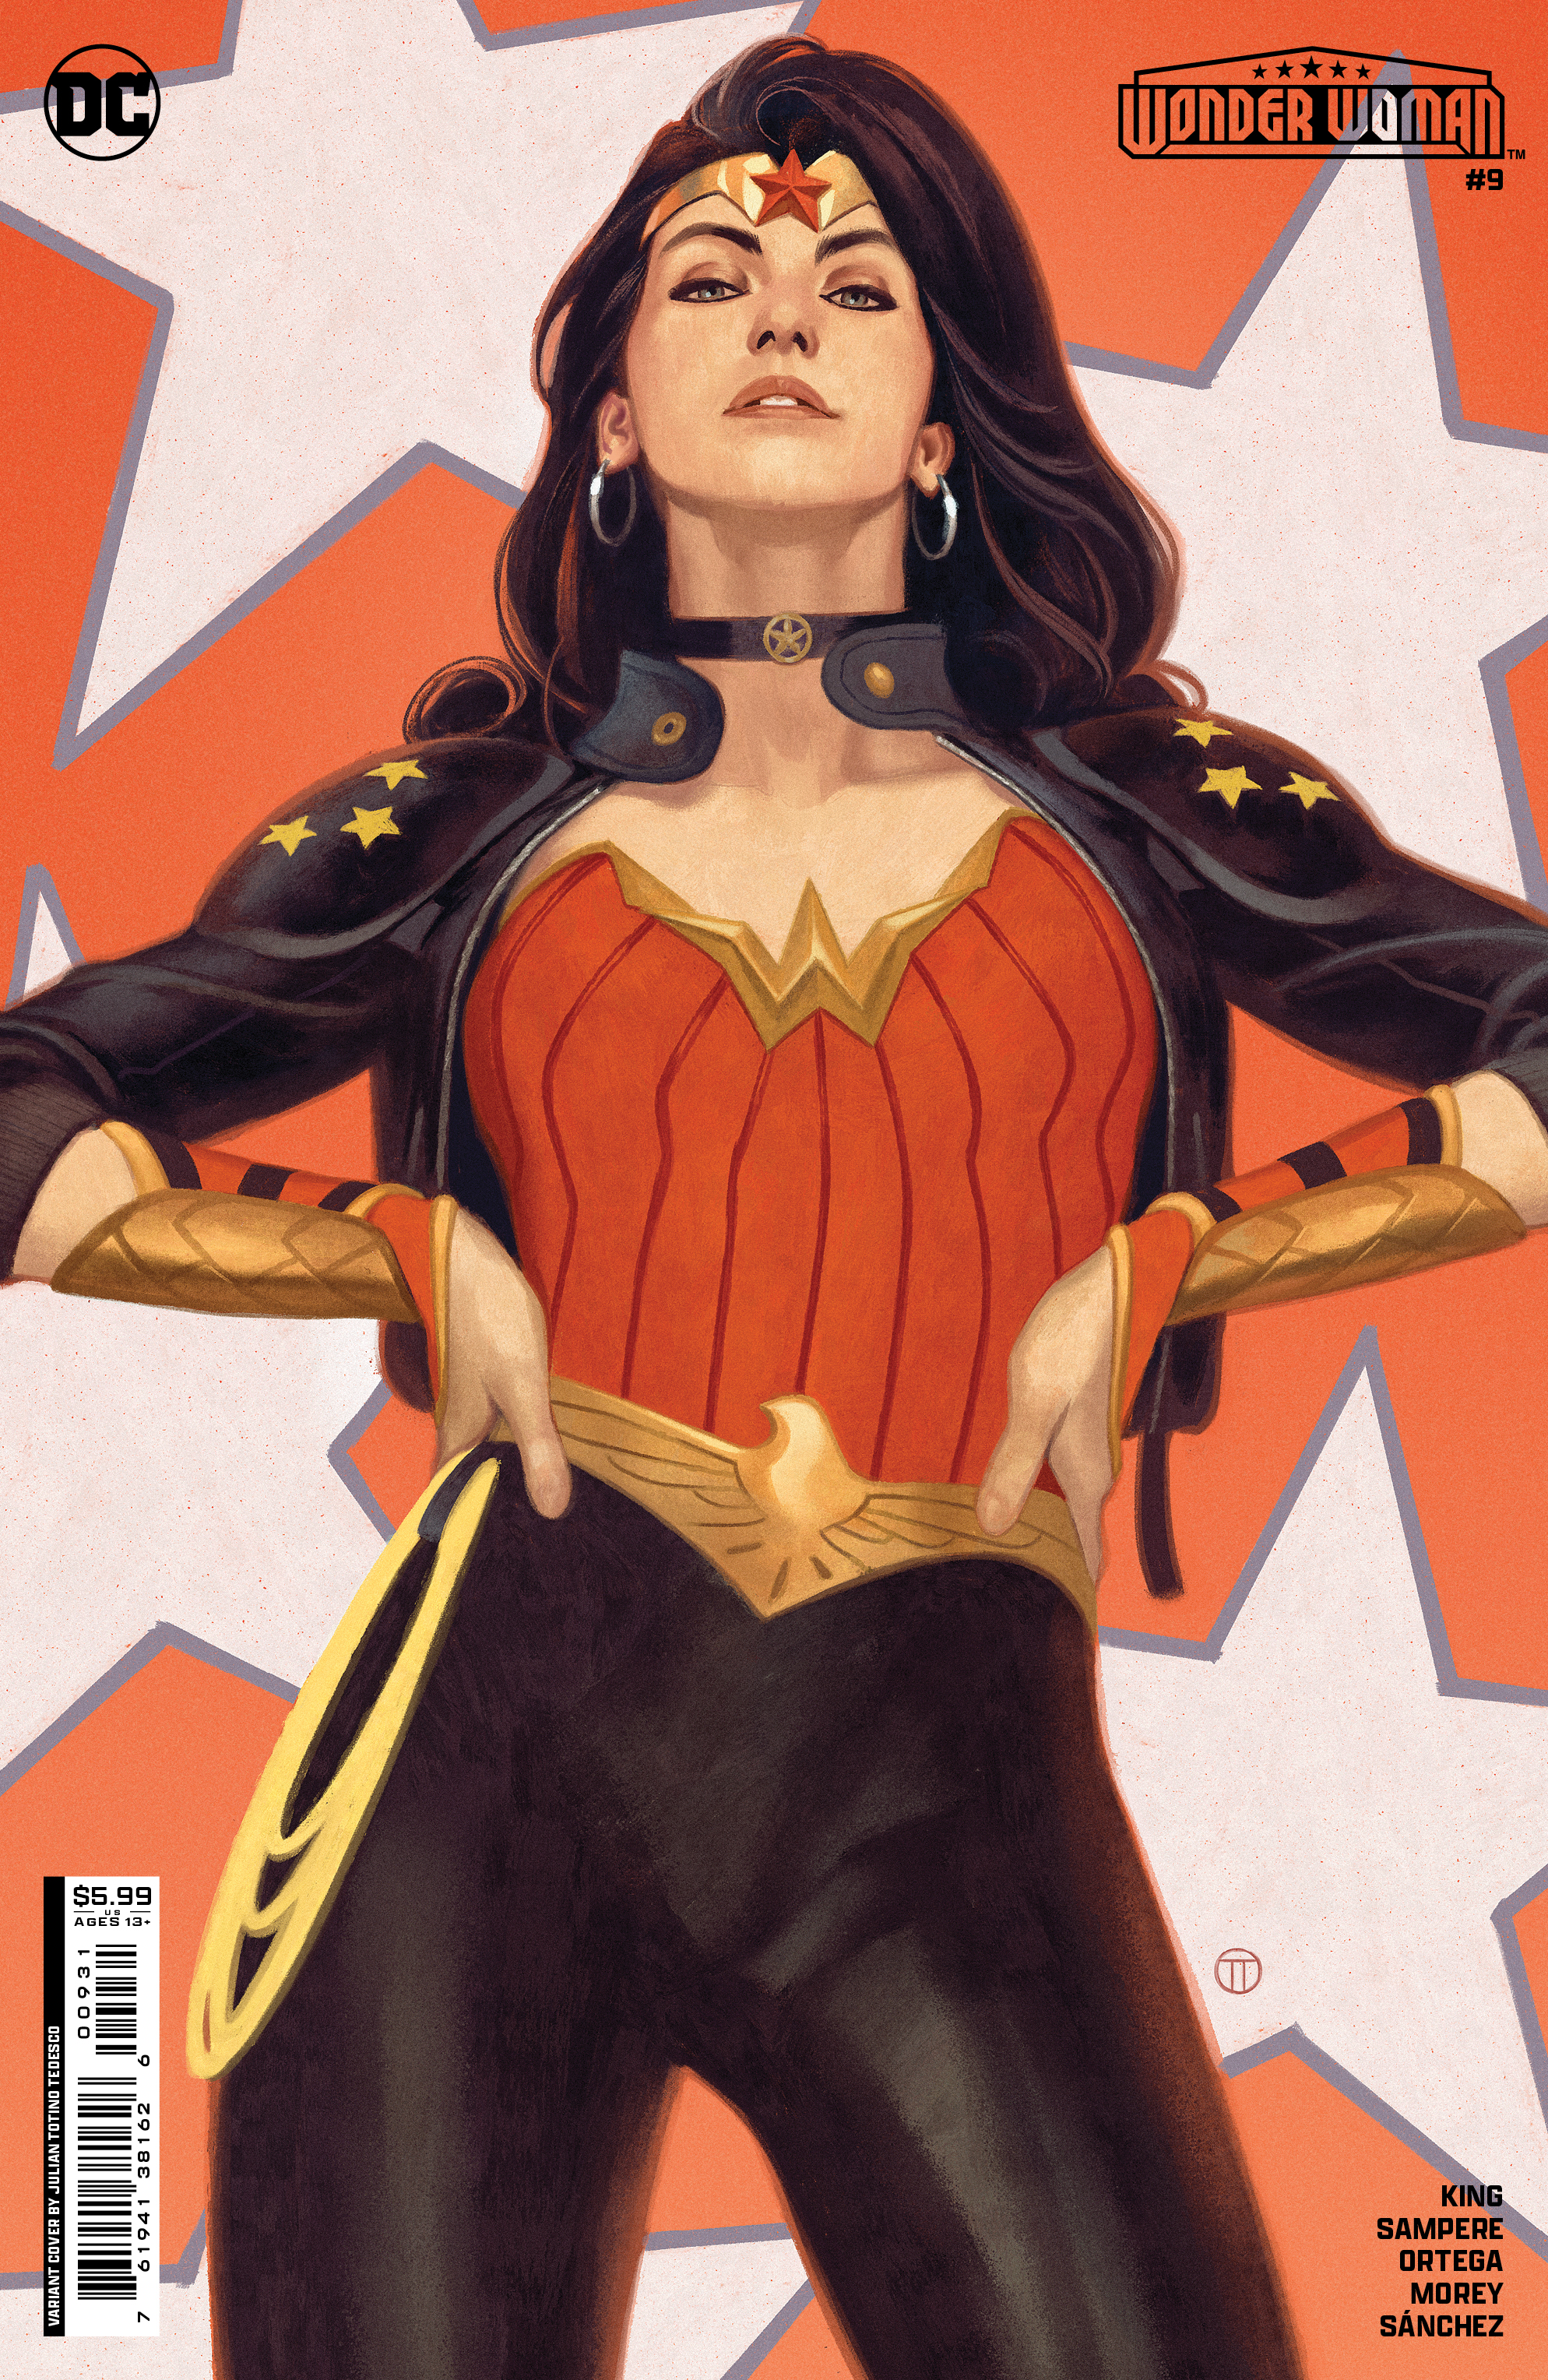 Covers from Wonder Woman #9.